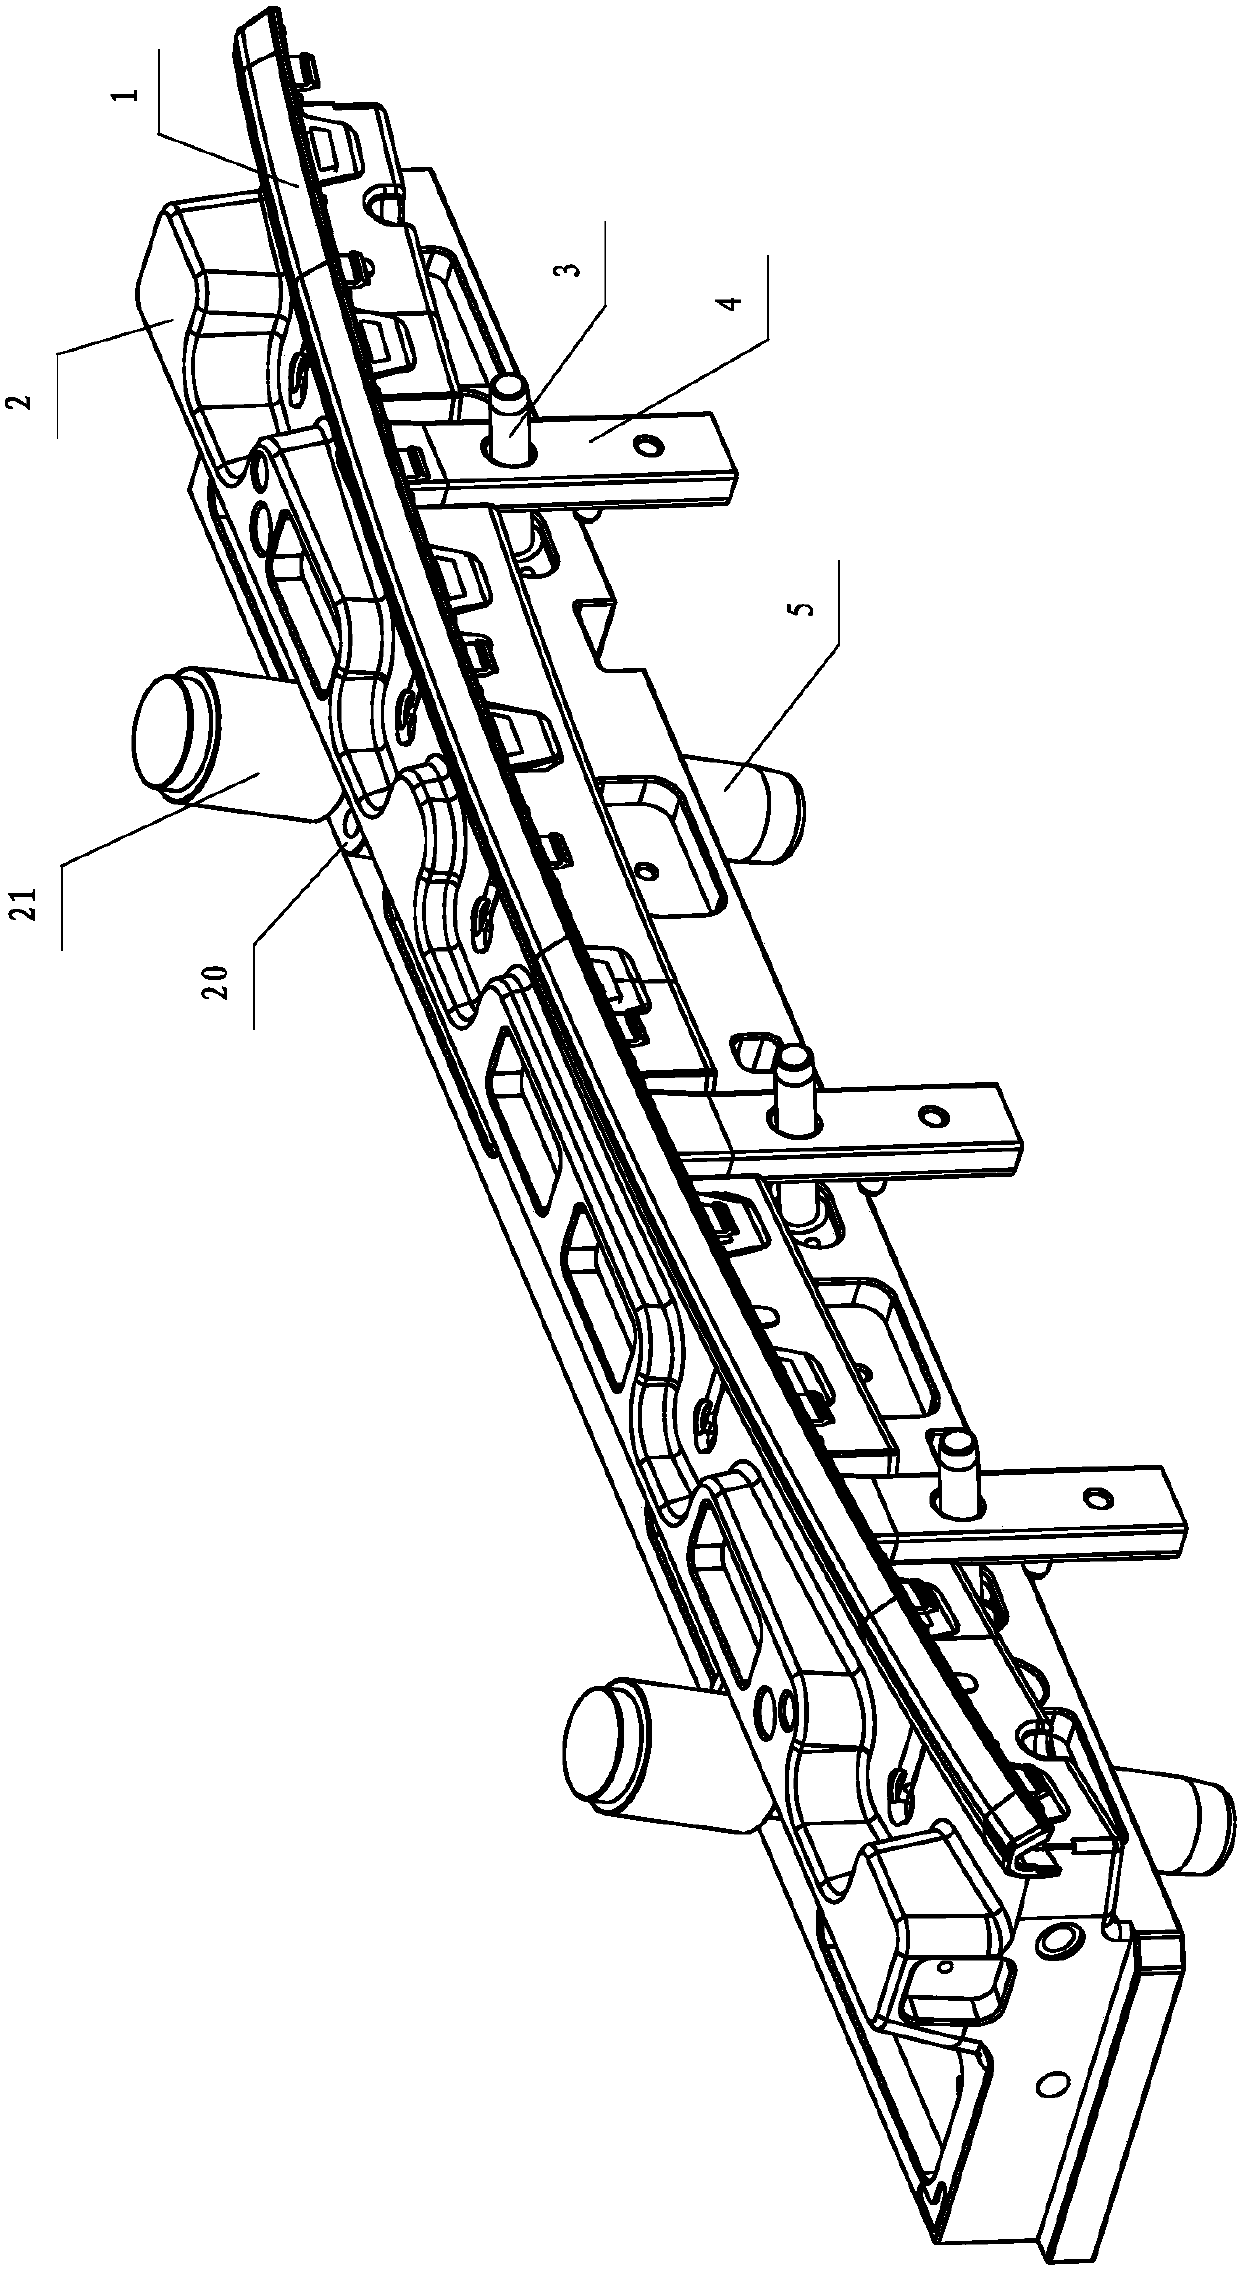 Injection mold ejection mechanism for electroplated parts